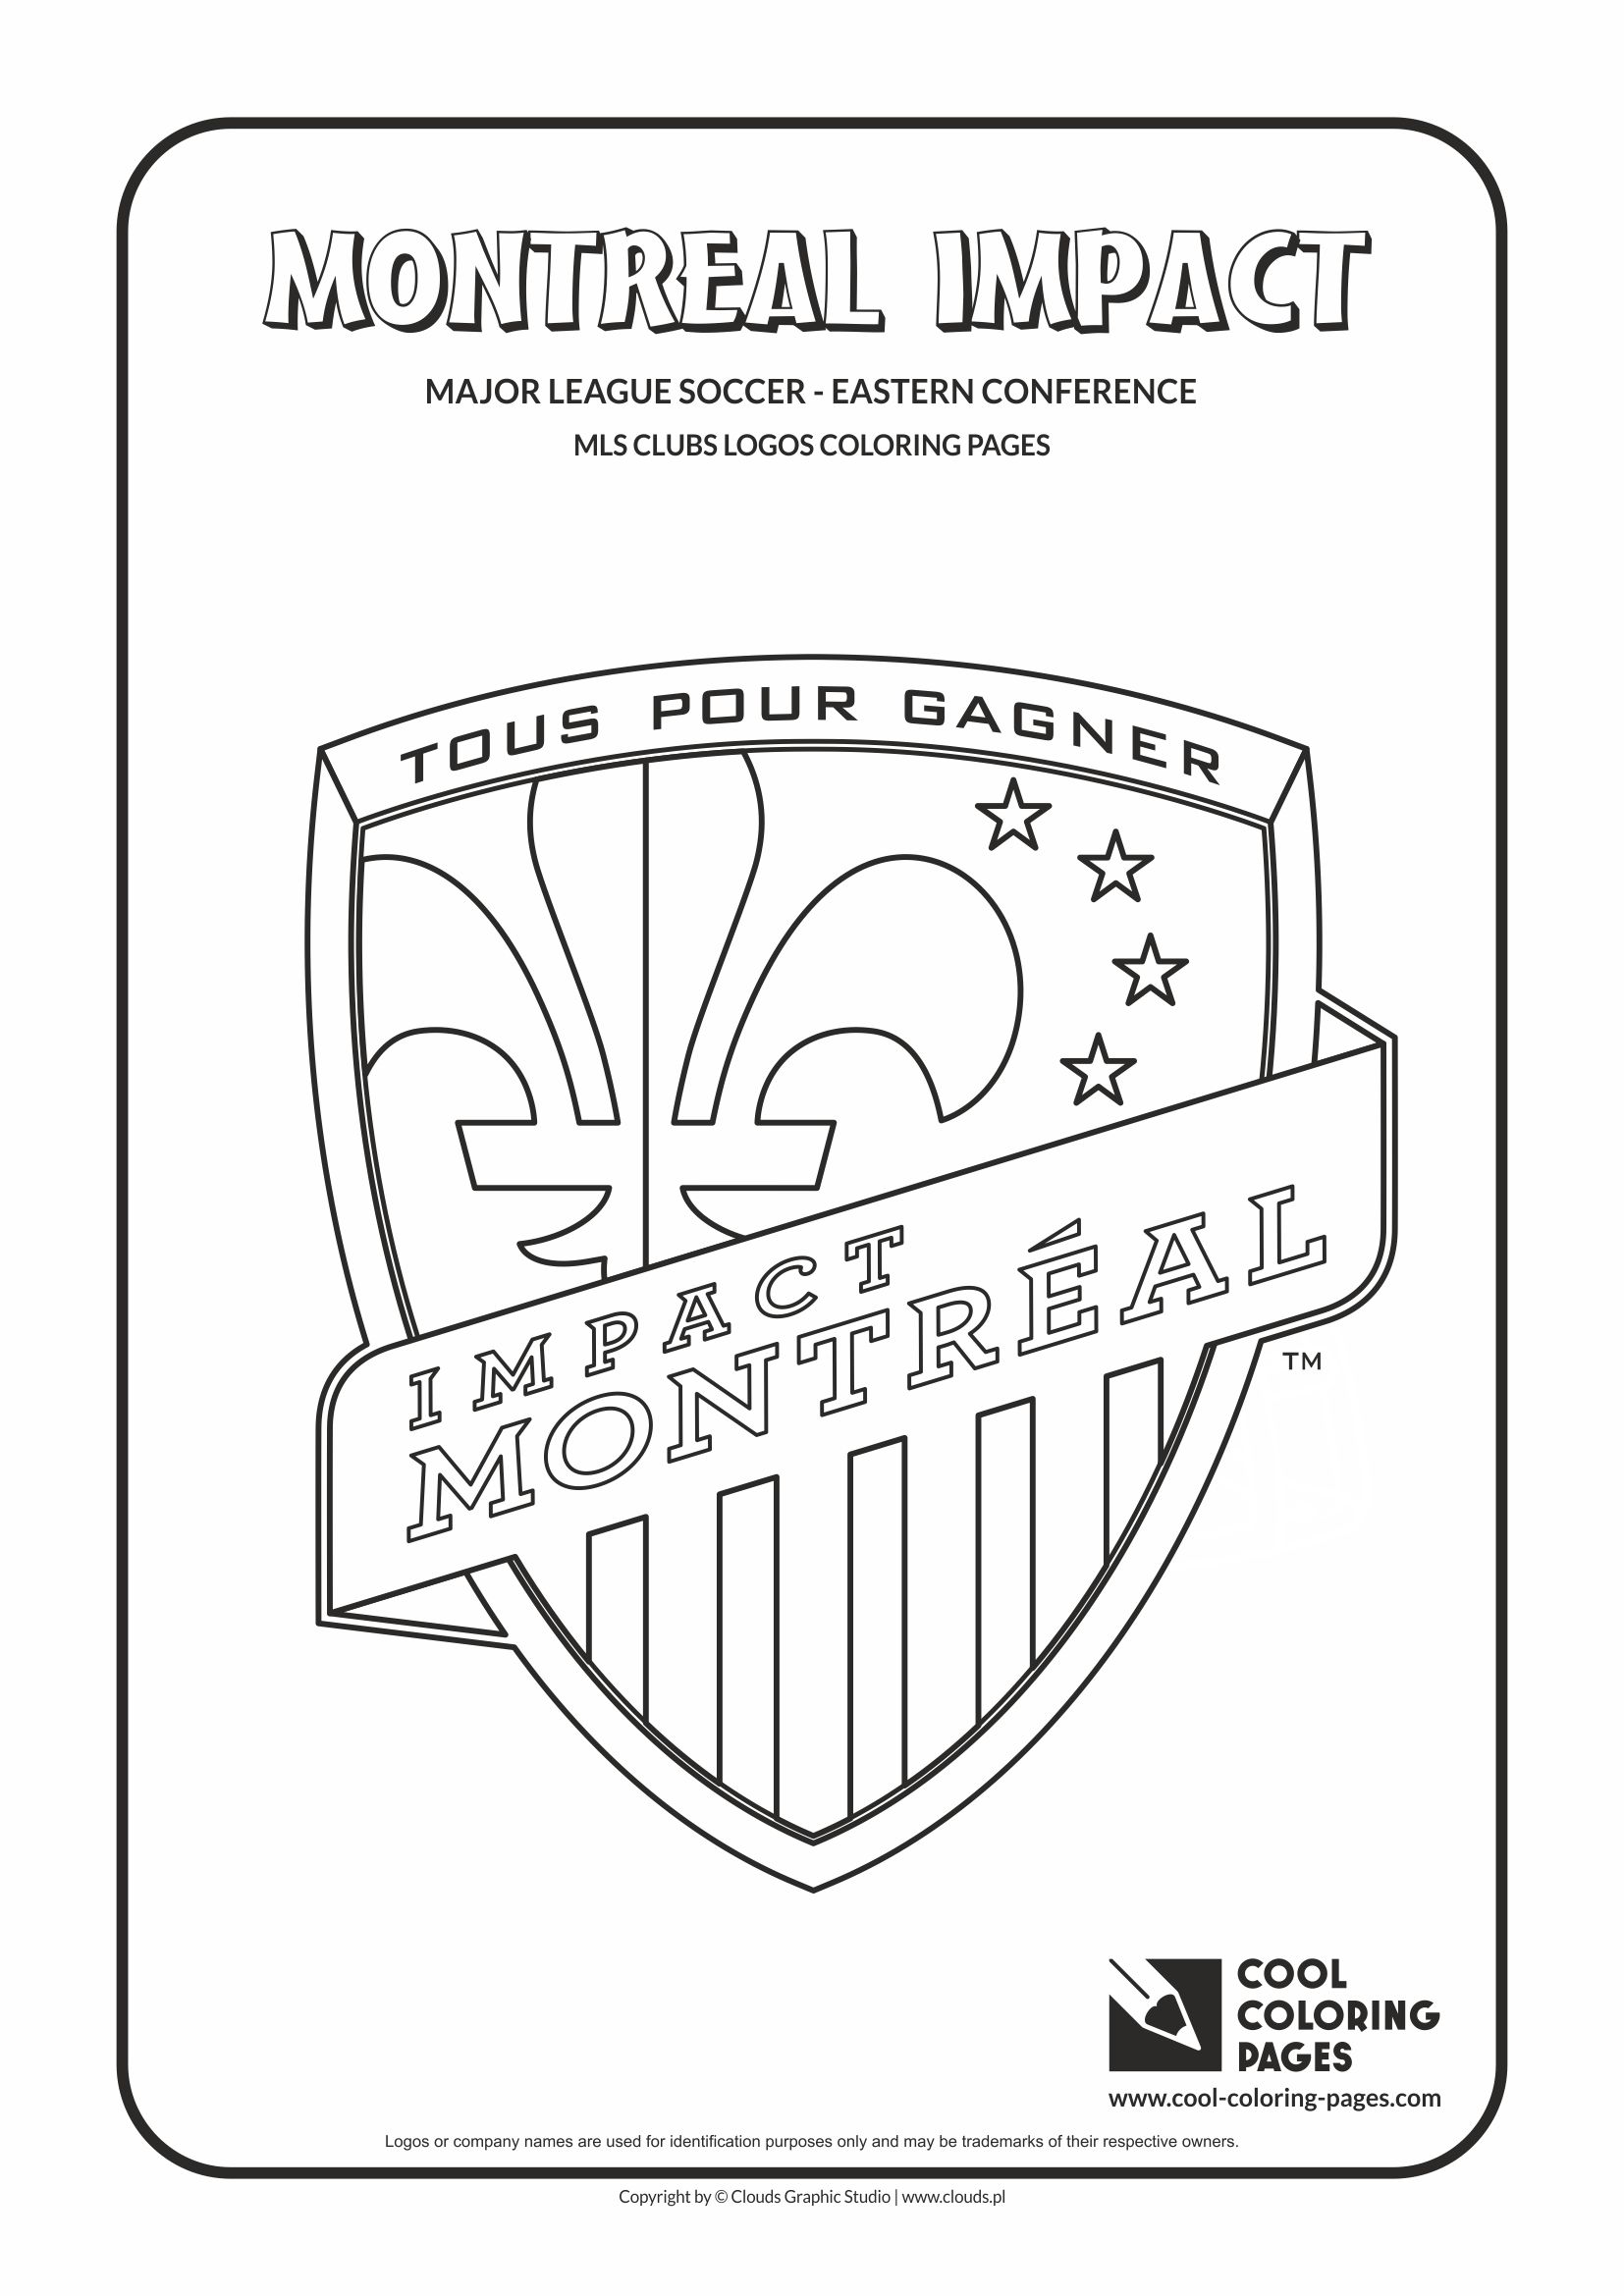 Cool Coloring Pages - Major League Soccer Logos - Eastern Conference / Montreal Impact logo / Coloring page with Montreal Impact logo